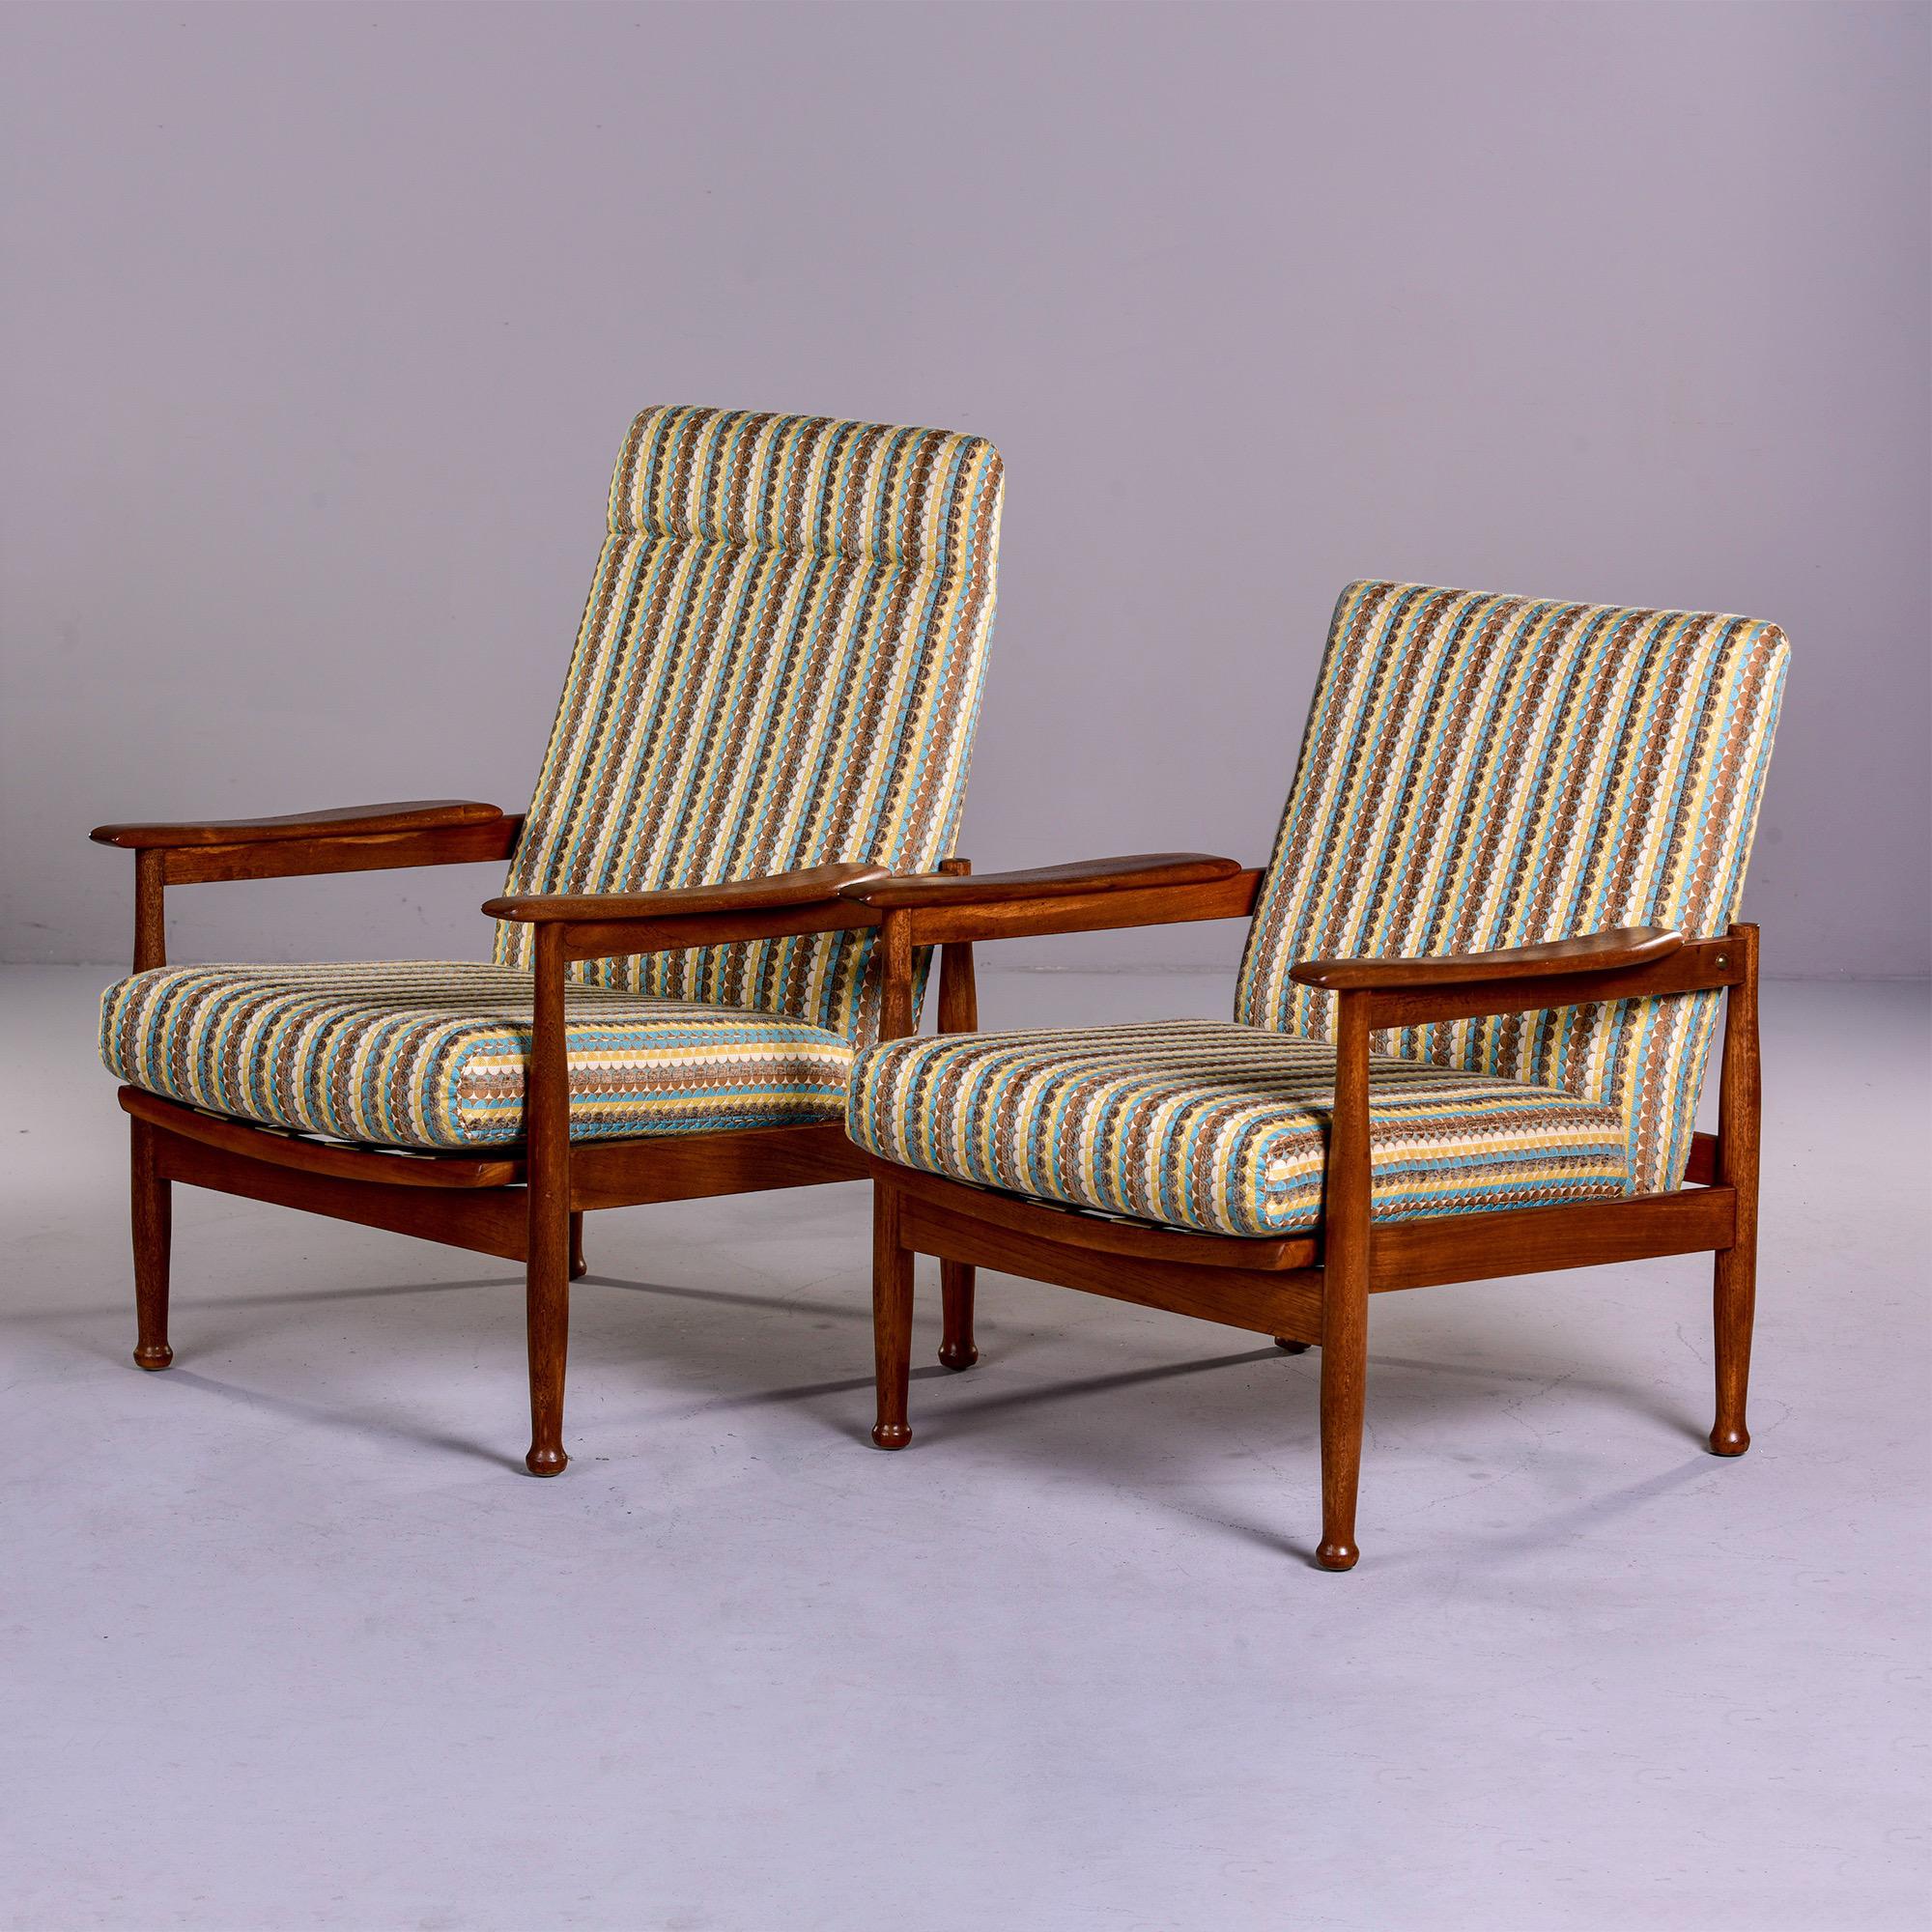 Near pair mid century Scandinavian Reclining elm chairs

This mid century near pair of Scandinavian elm wood framed reclining chairs date from 1970. Sometimes referred to as a King and Queen chair, these chairs are meant to be used together.